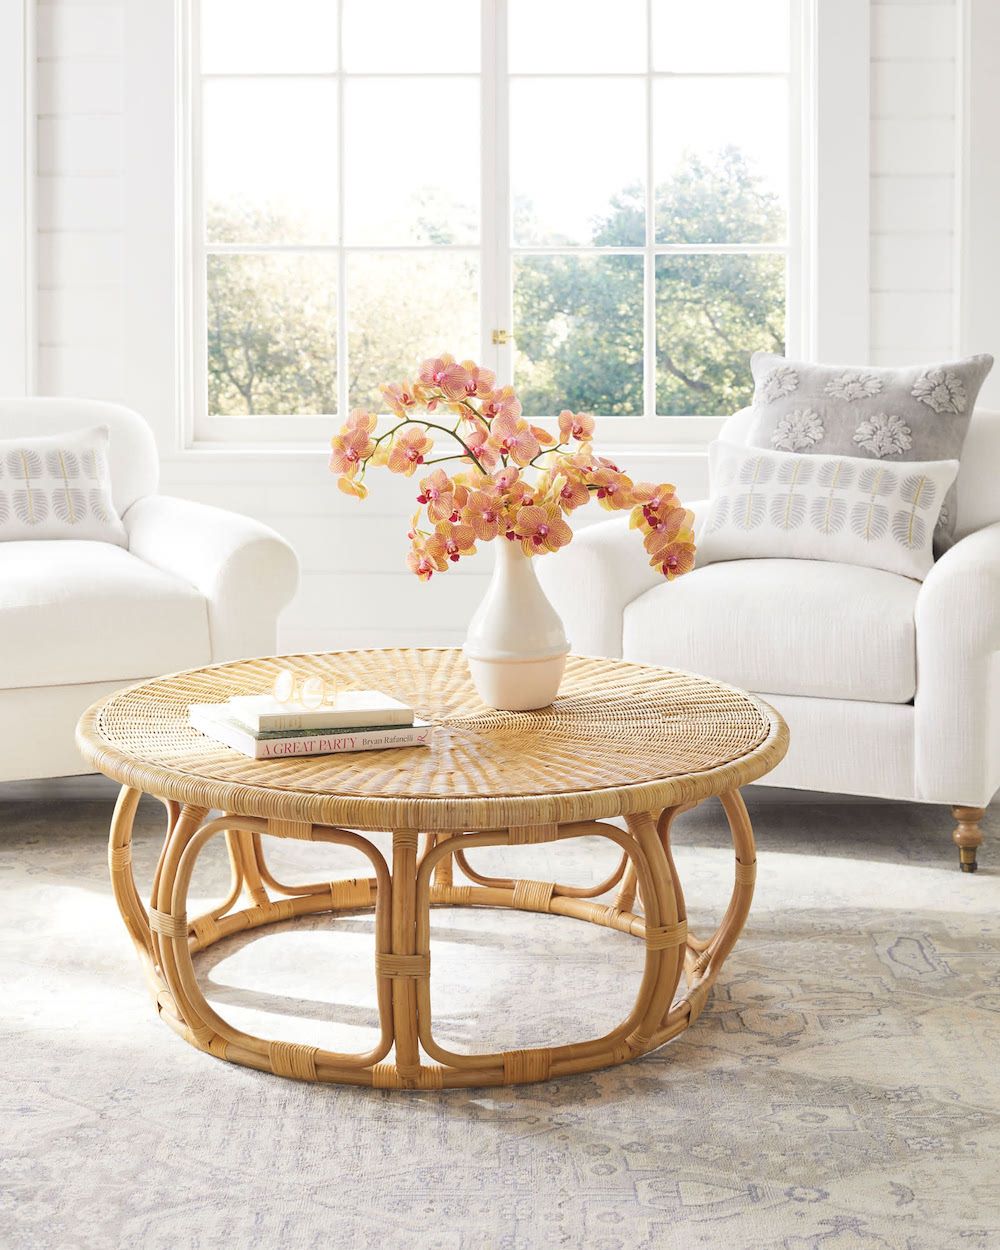 24 Rattan Coffee Tables For The Summer Home Throughout Rattan Coffee Tables (View 11 of 15)